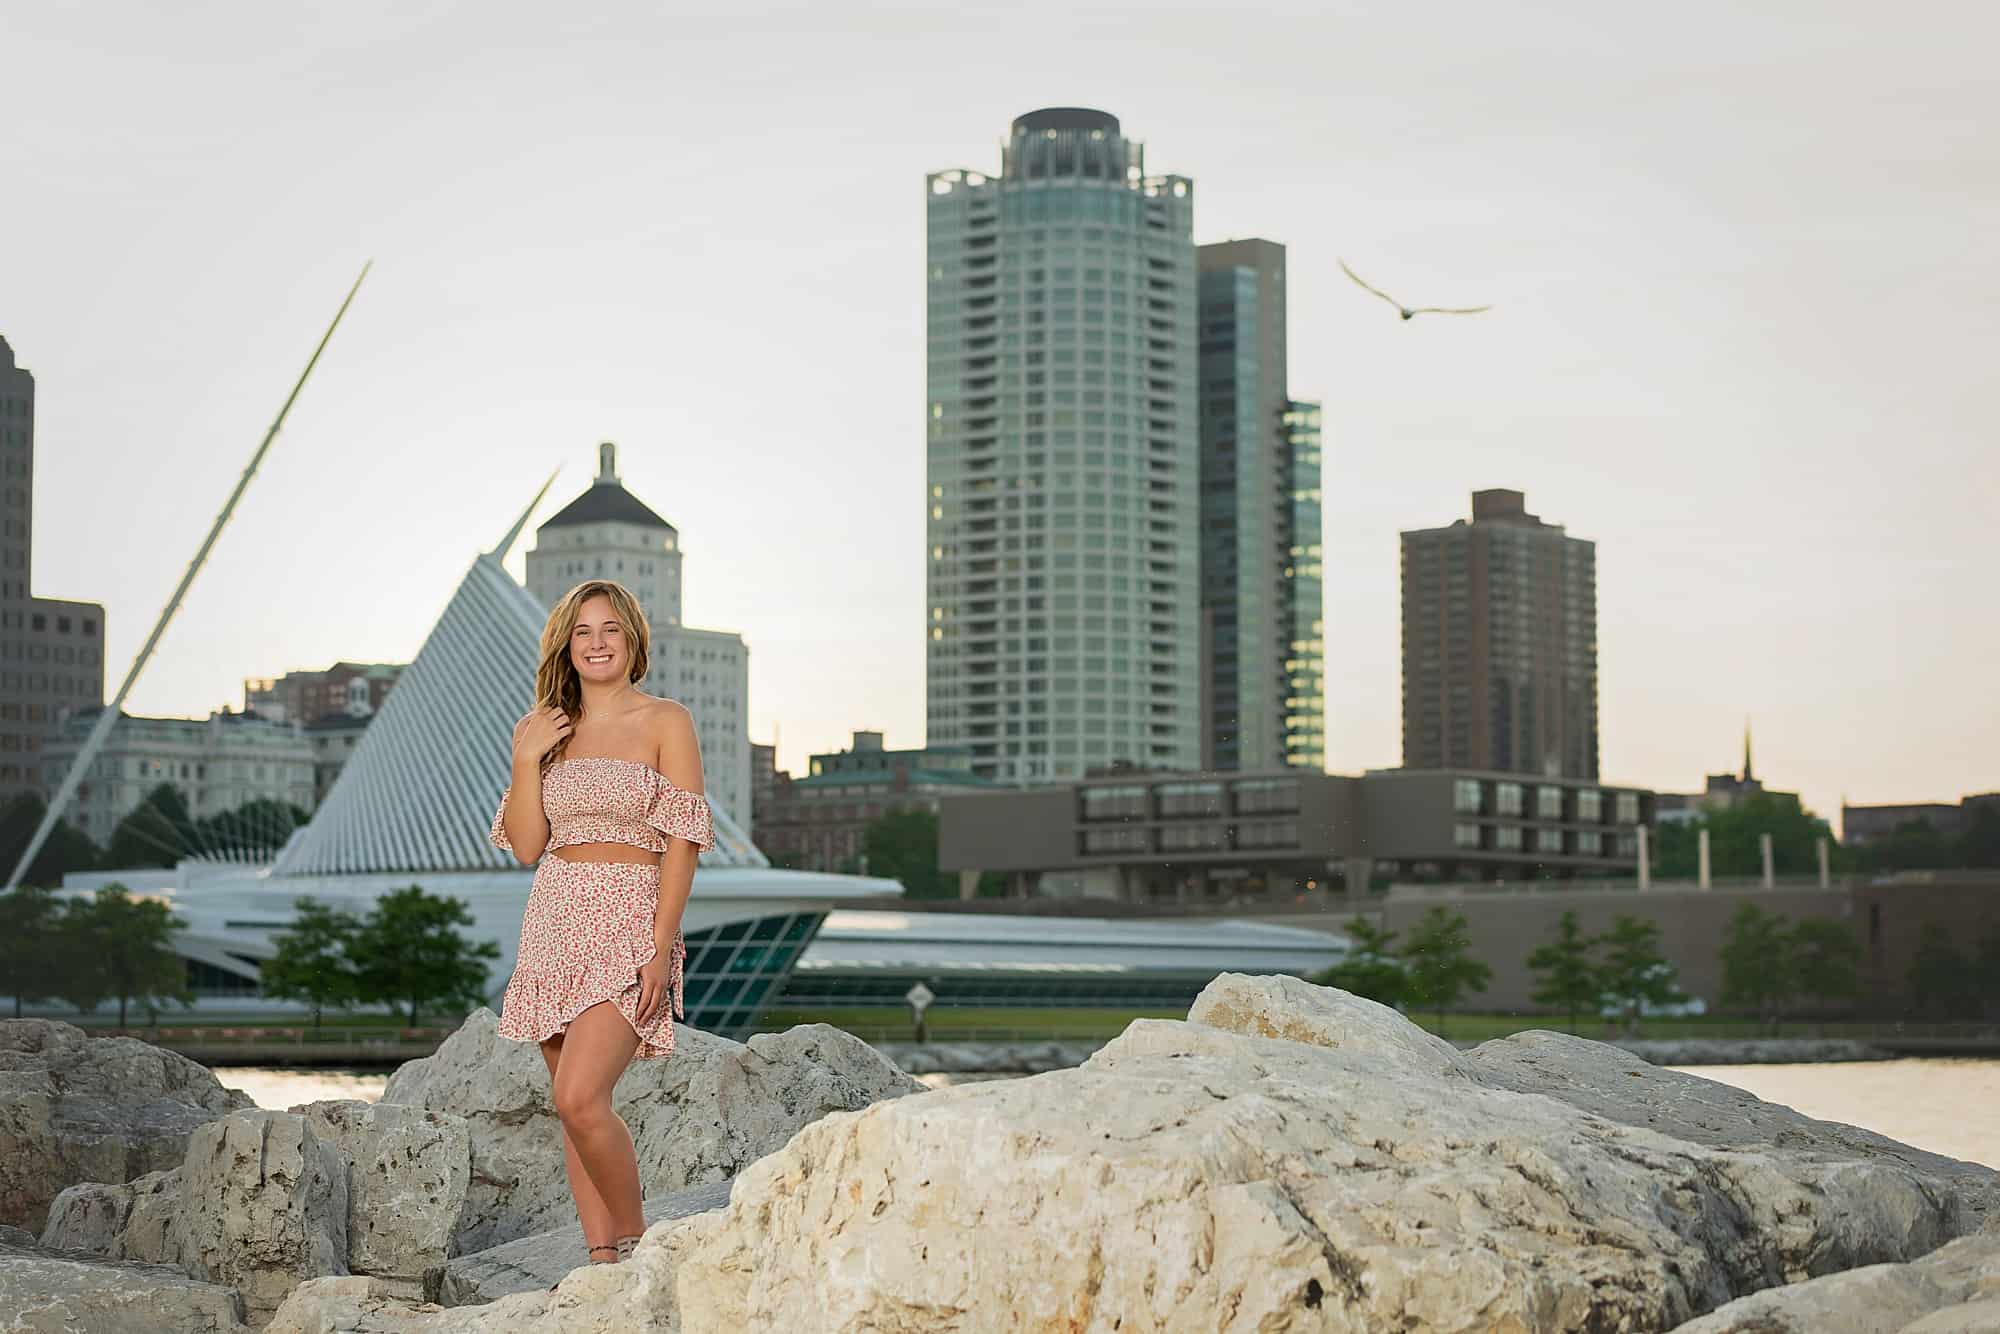 Senior Pictures in Downtown MKE